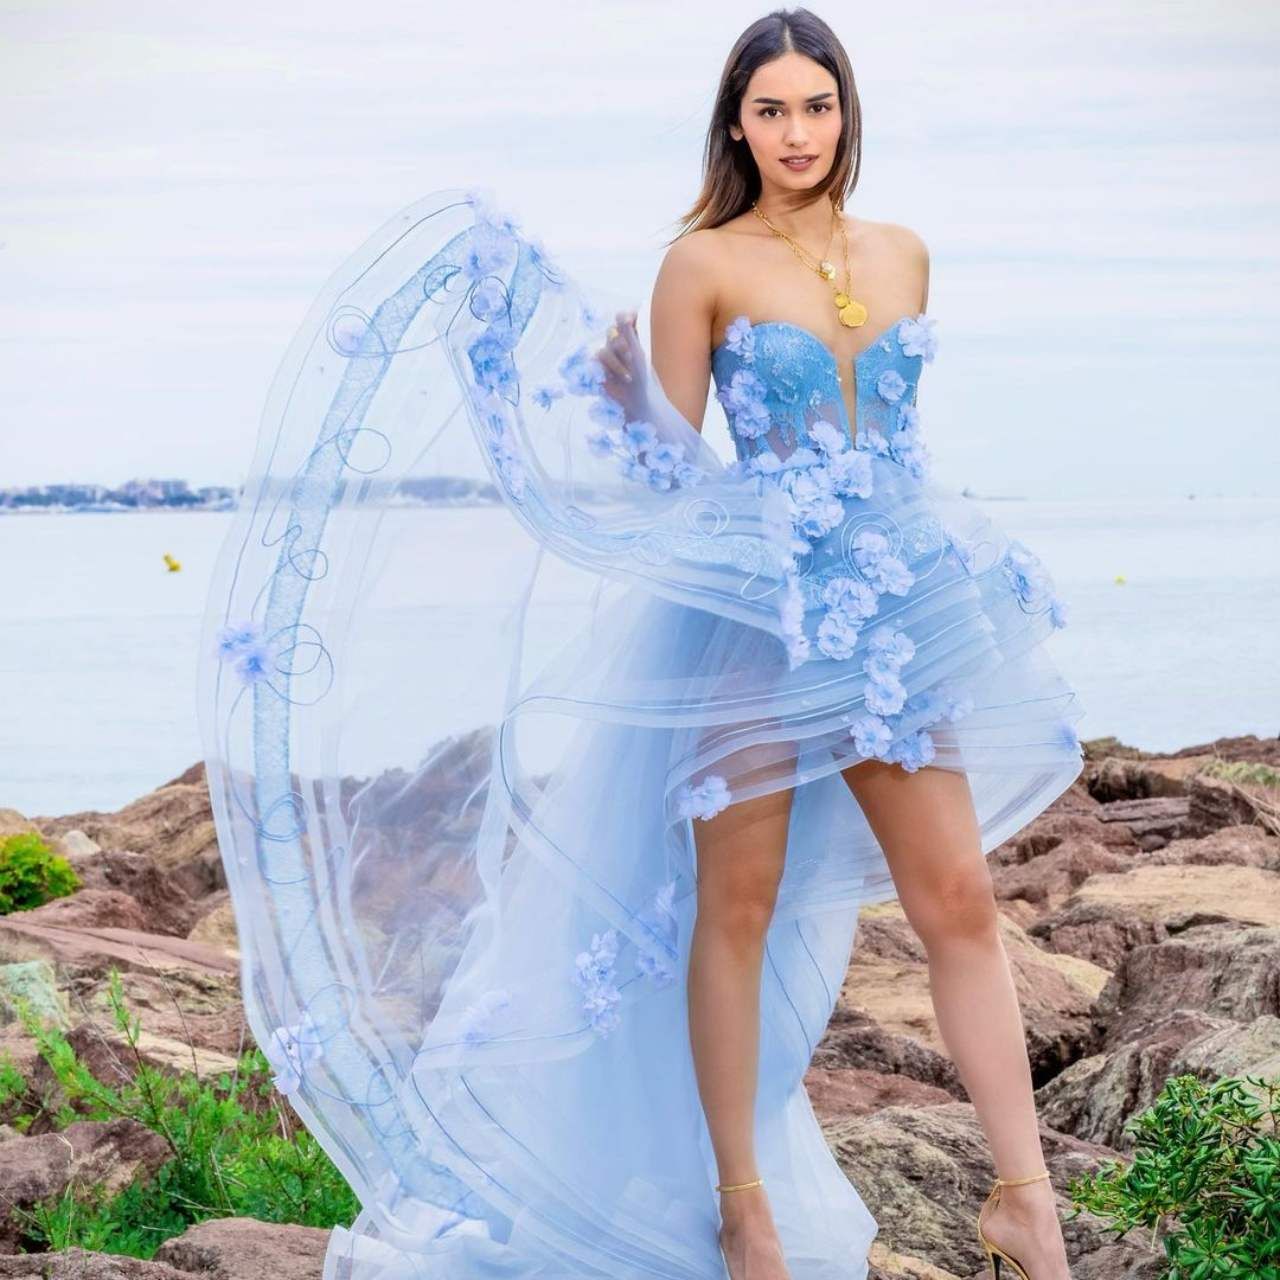 Manushi Chhillar - Actress Manushi Chhillar has worn a pastel transparent gown of blue color in this picture.  For accessories, the actress wore golden pendant and golden high heels.